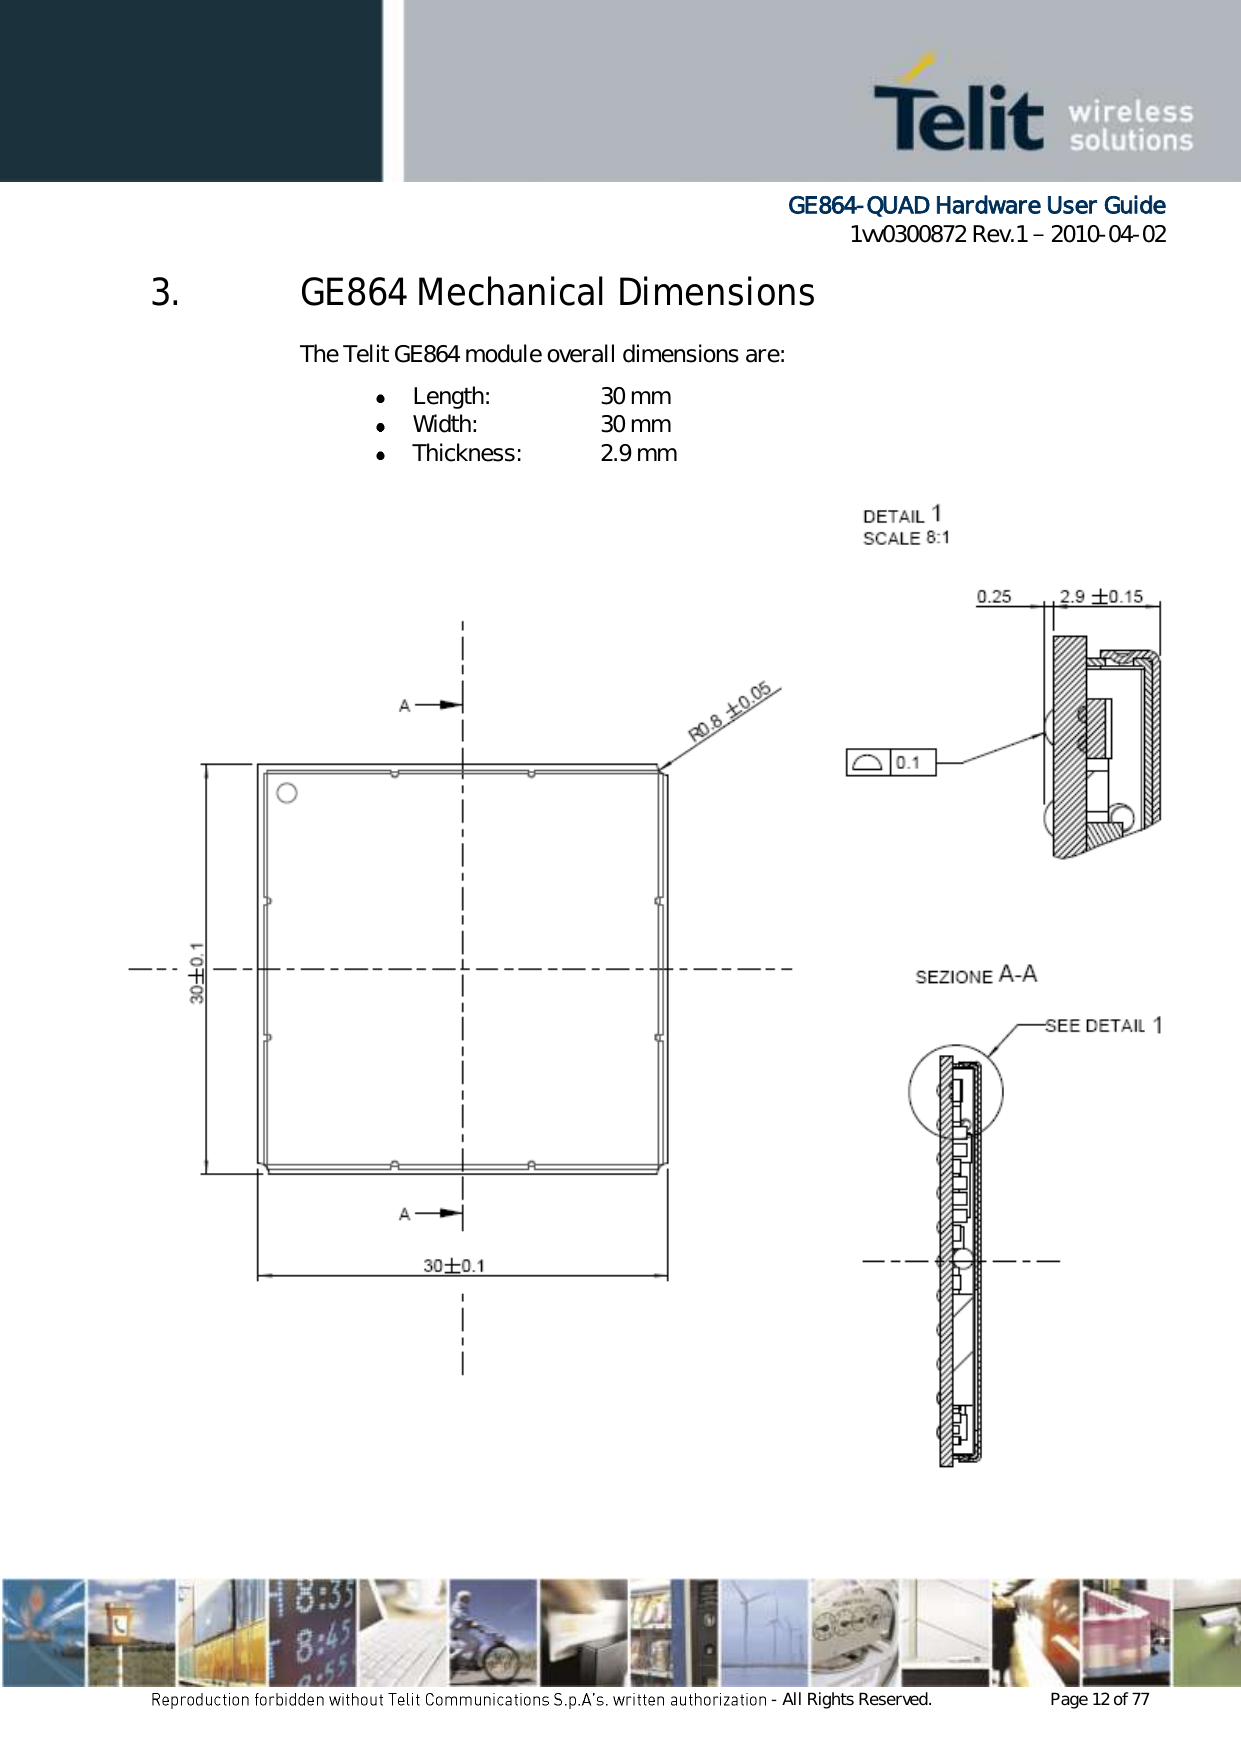      GE864-QUAD Hardware User Guide 1vv0300872 Rev.1   2010-04-02 - All Rights Reserved.    Page 12 of 77  3. GE864 Mechanical Dimensions The Telit GE864 module overall dimensions are:  Length:    30 mm  Width:    30 mm  Thickness:   2.9 mm 